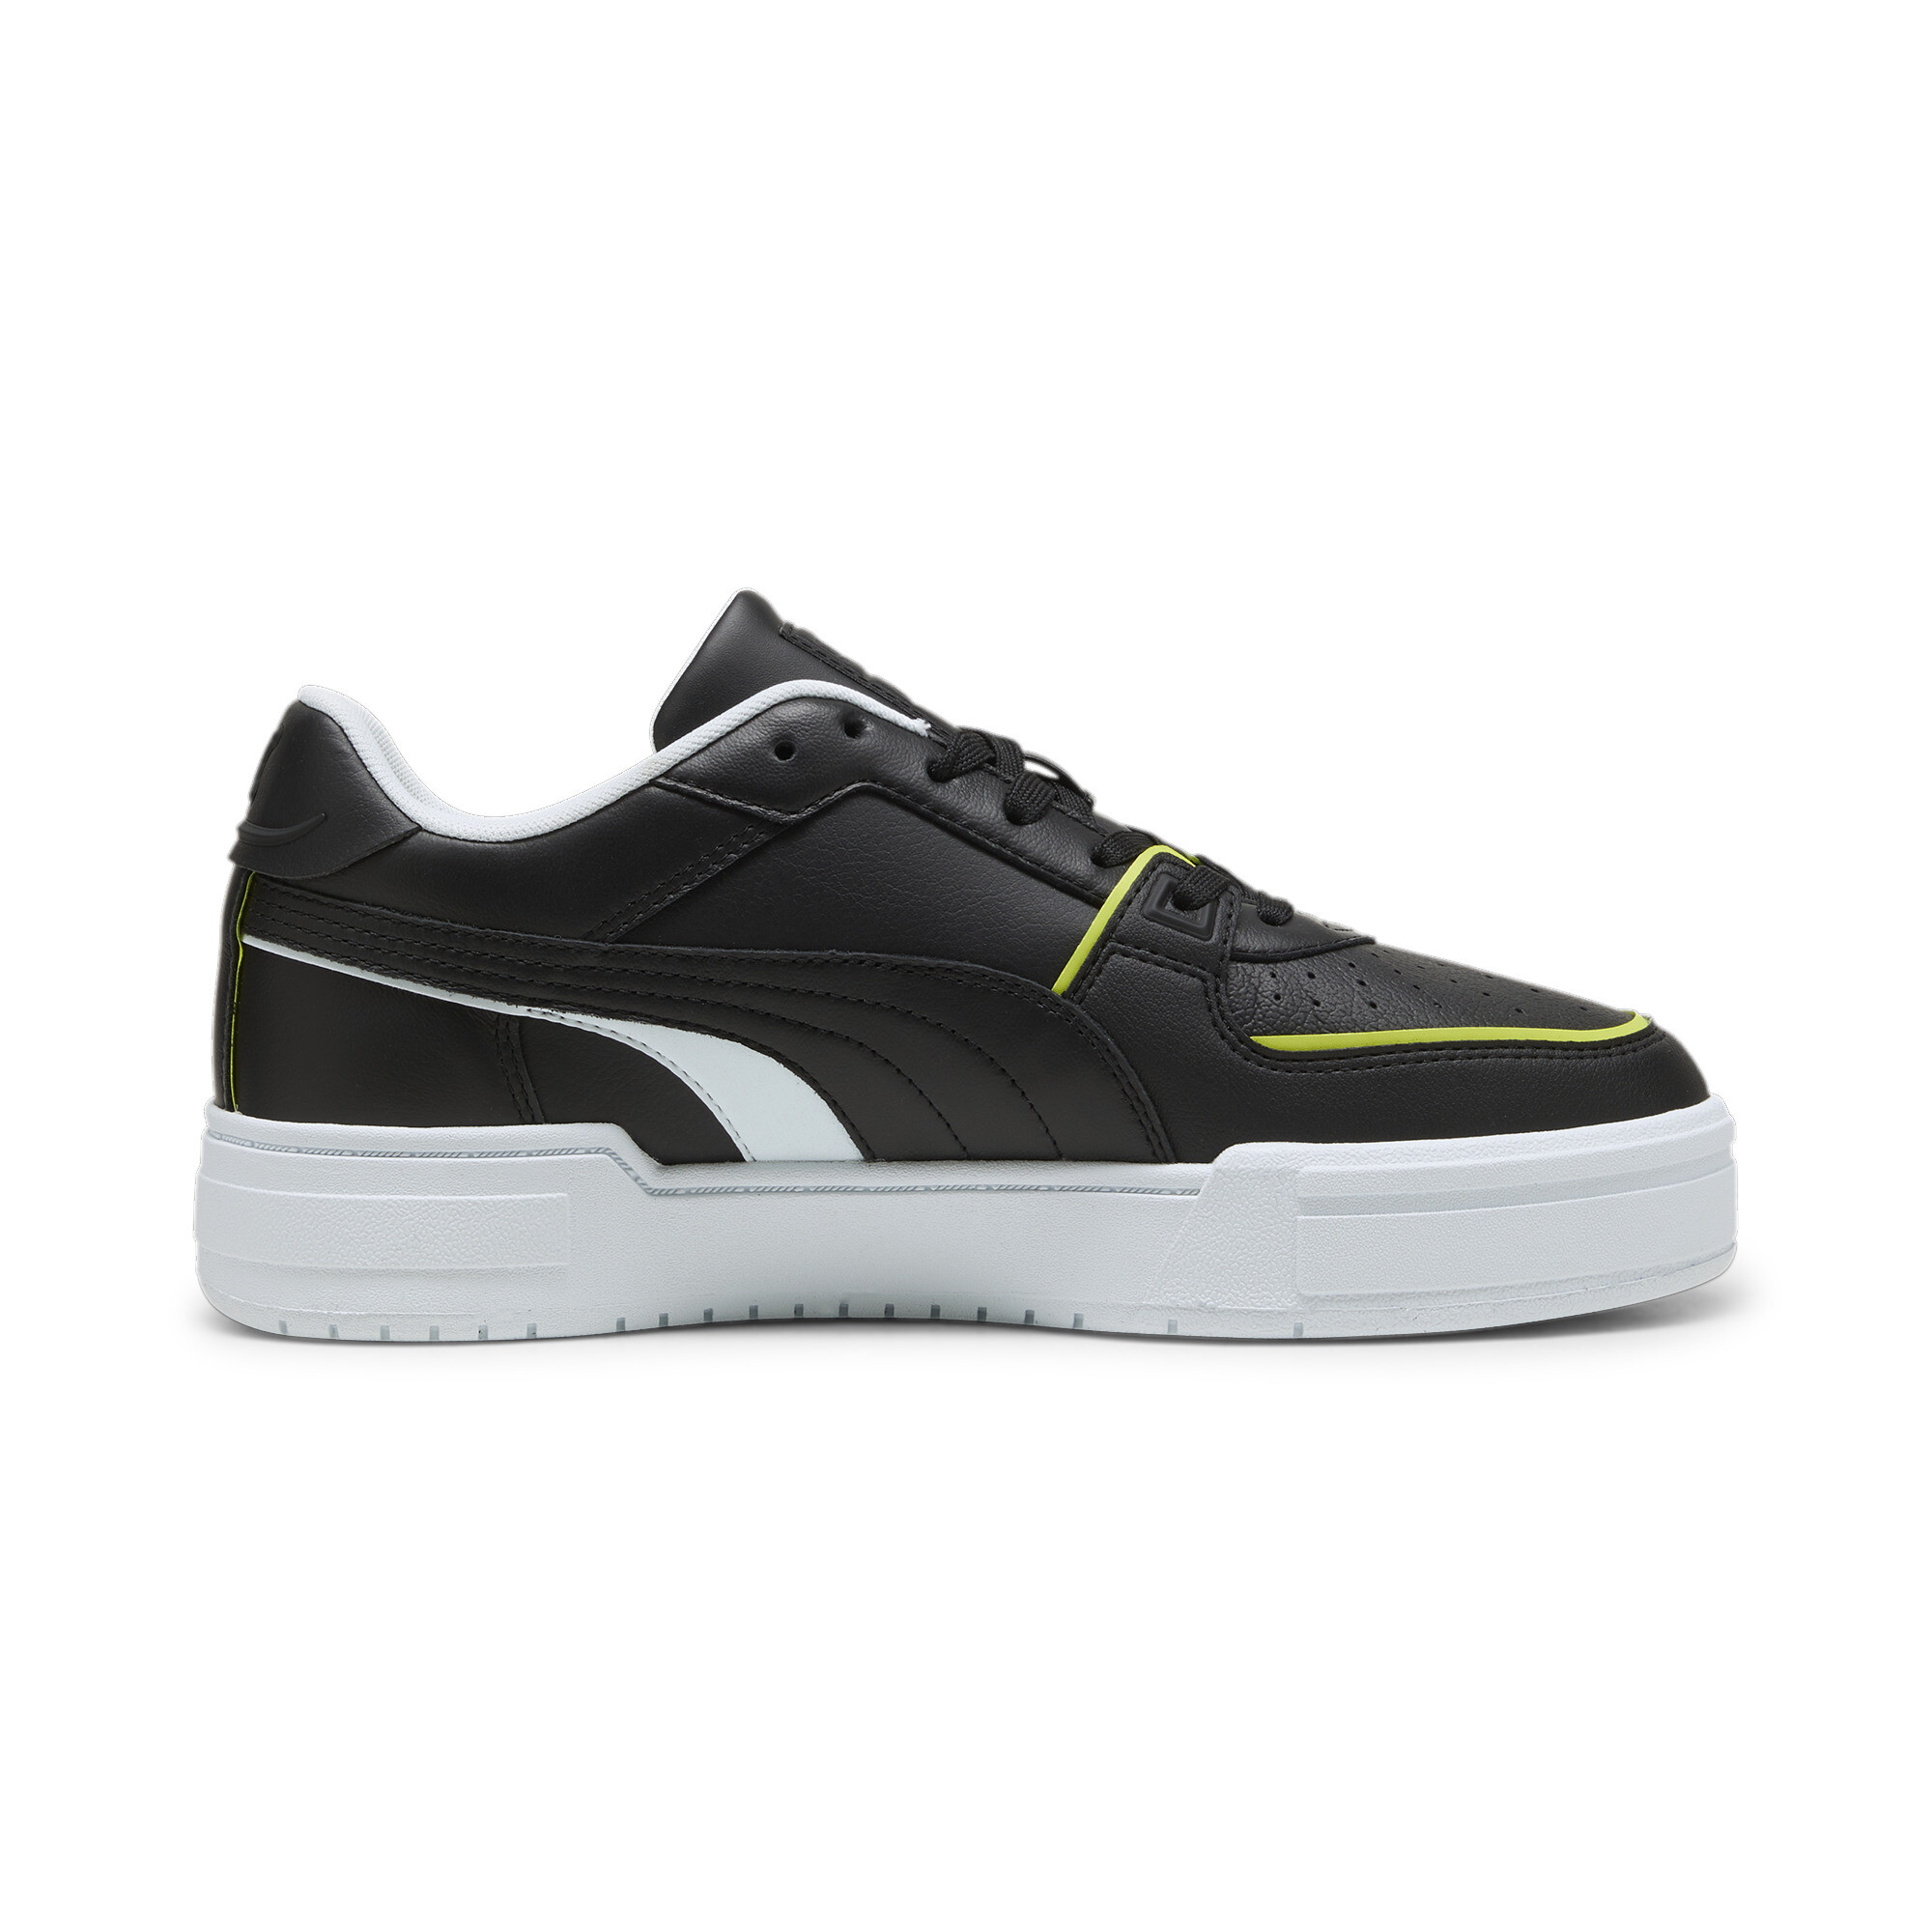 Puma AMG CA Pro Sneakers, Black, Size 35.5, Shoes